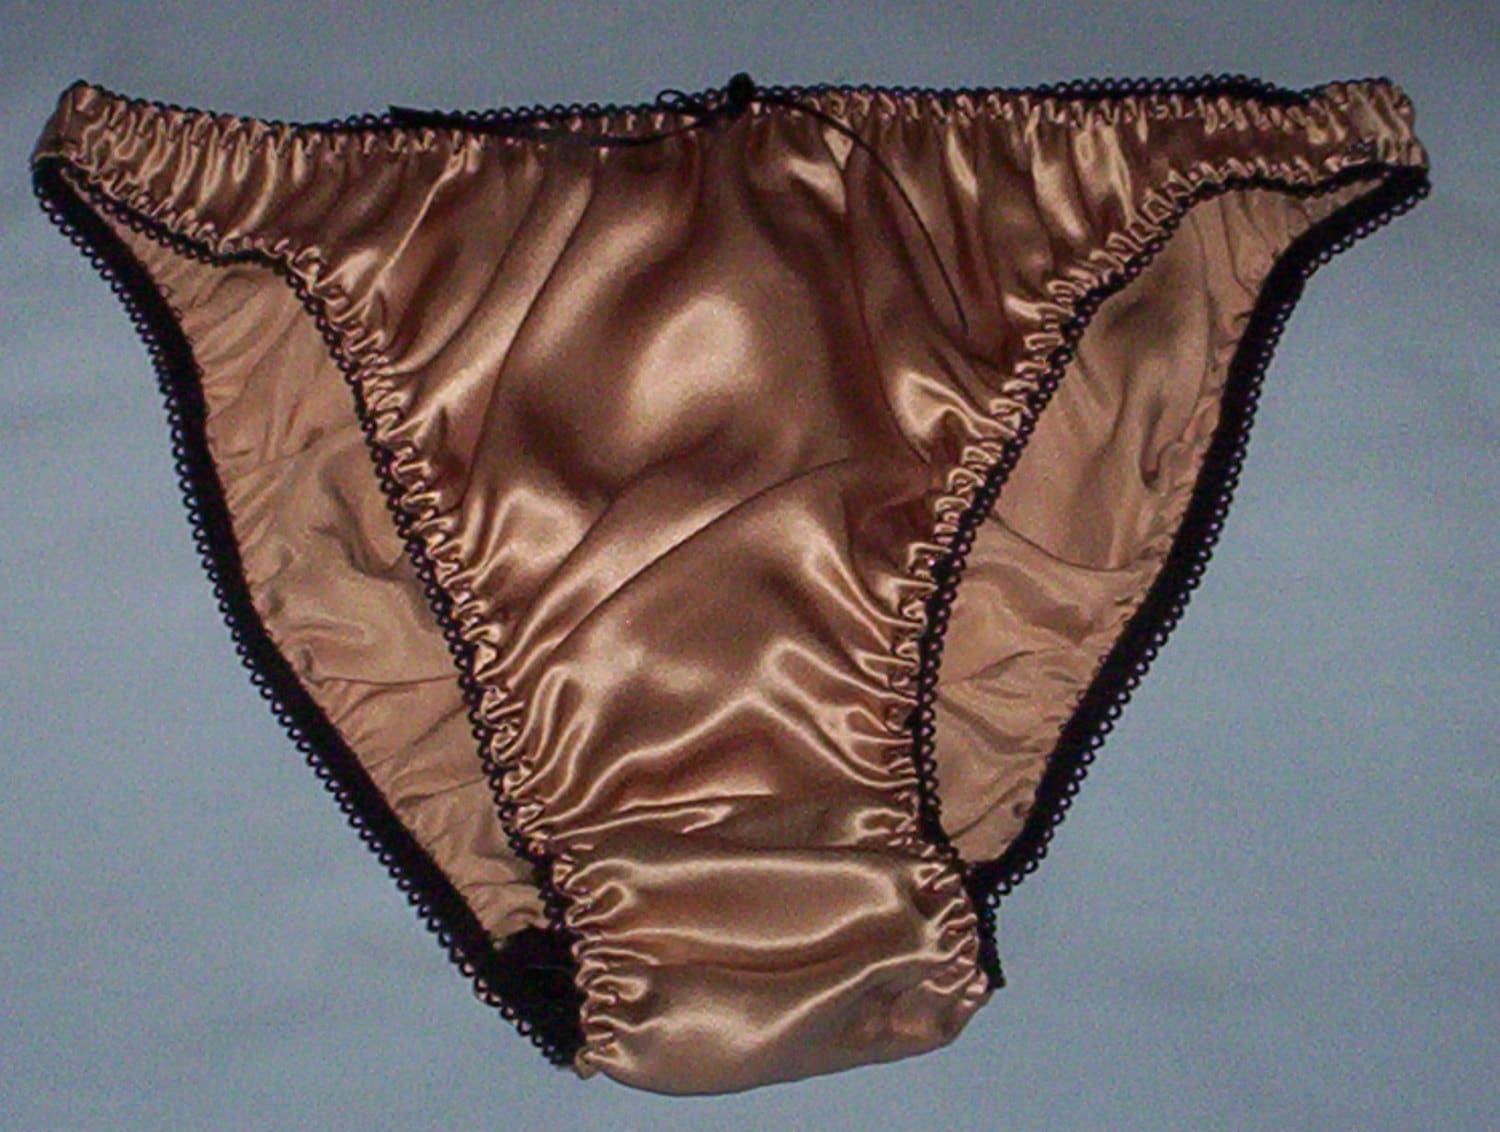 Mink Silk Satin Panties Available In Uk Sizes 8 By Tigerlizzylou